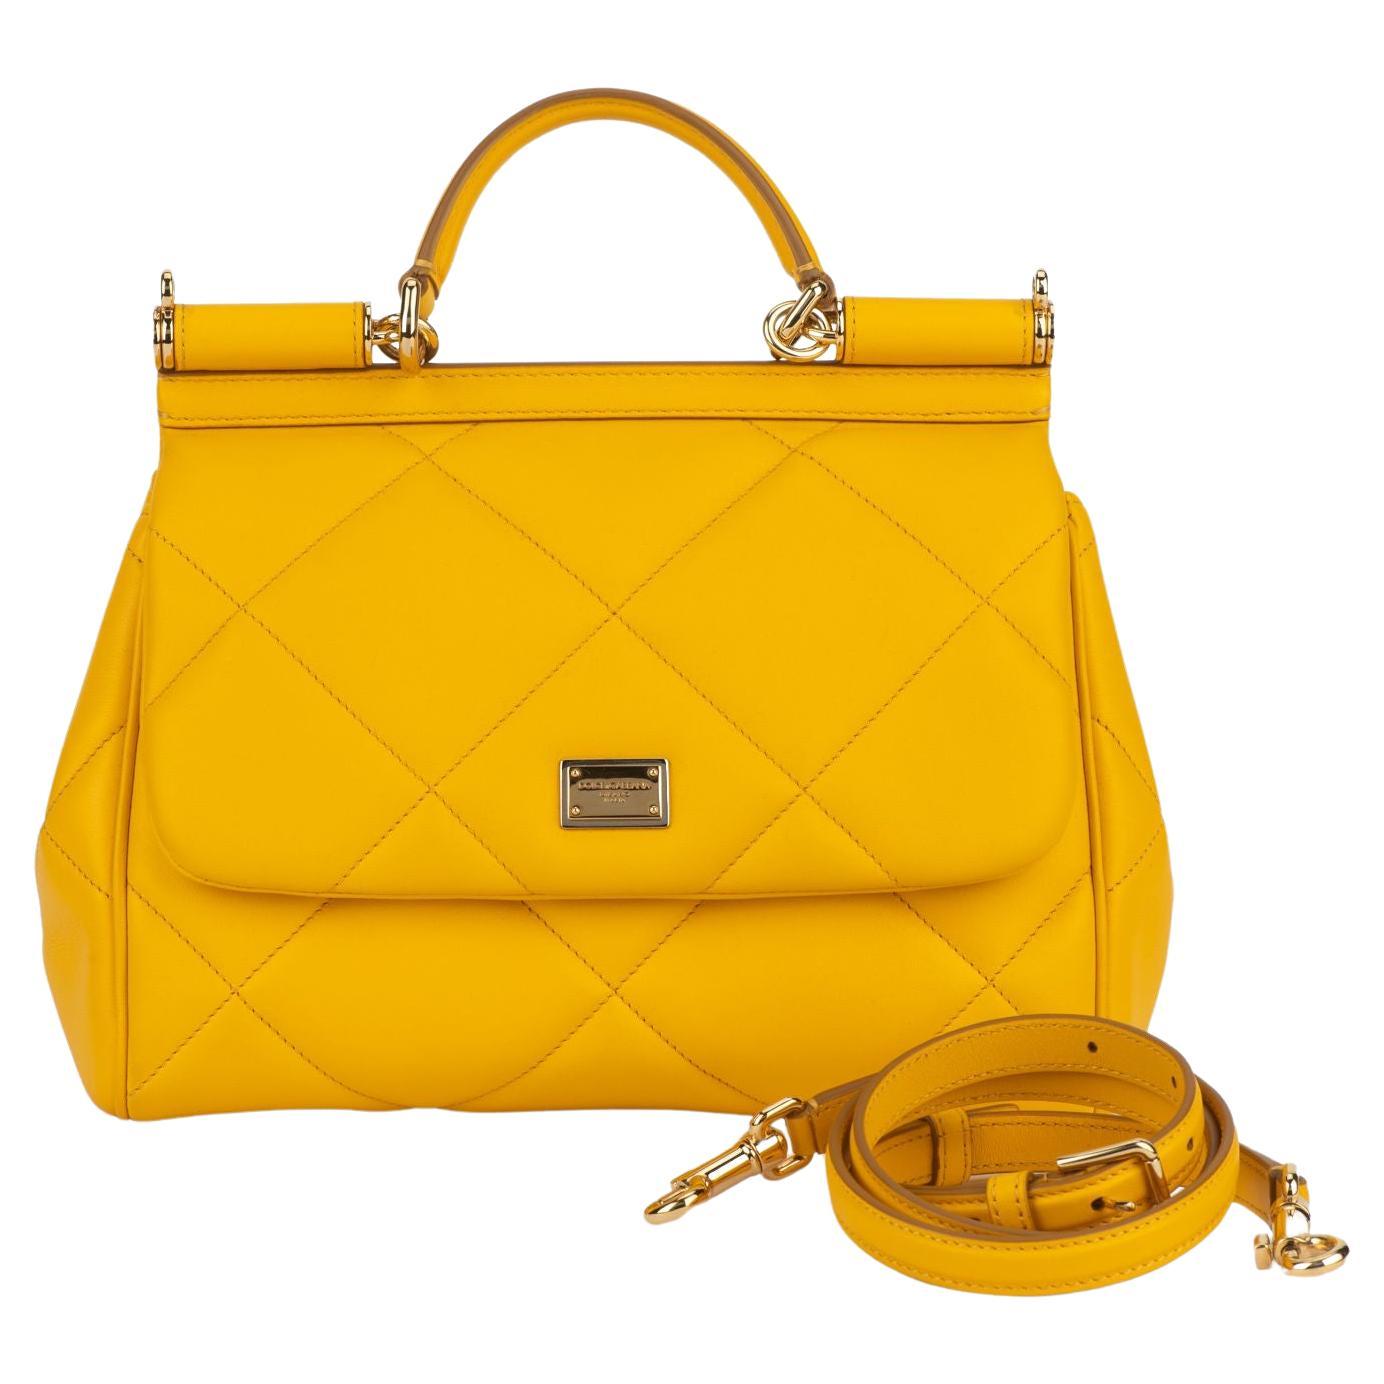 Dolce & Gabbana New Yellow Sicily Bag For Sale